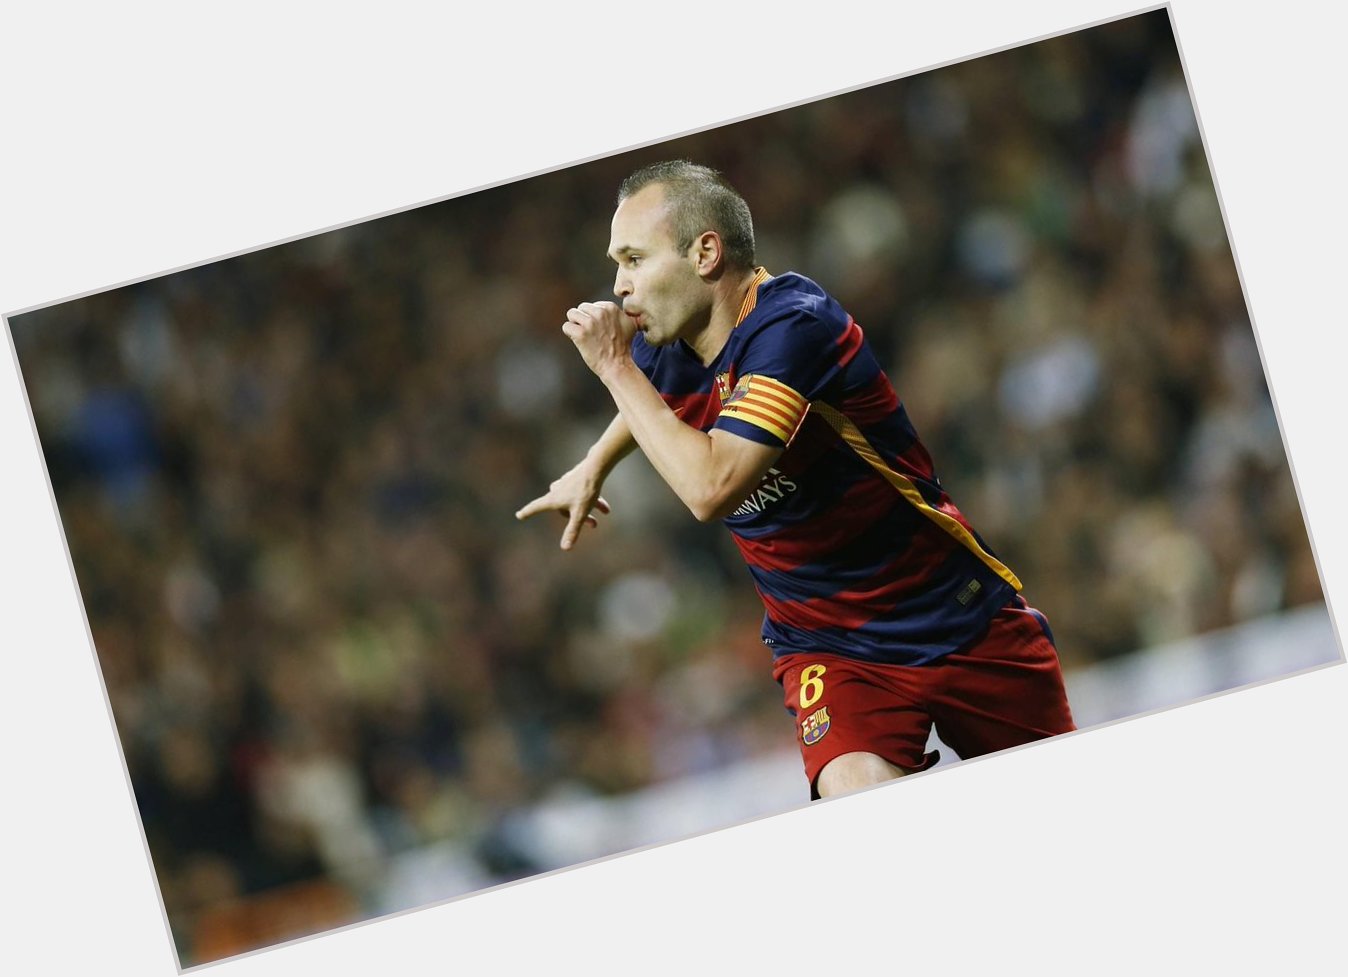 Happy 33rd birthday to the best midfielder ever(alongside Xavi of course) the one and only Andrés Iniesta. 